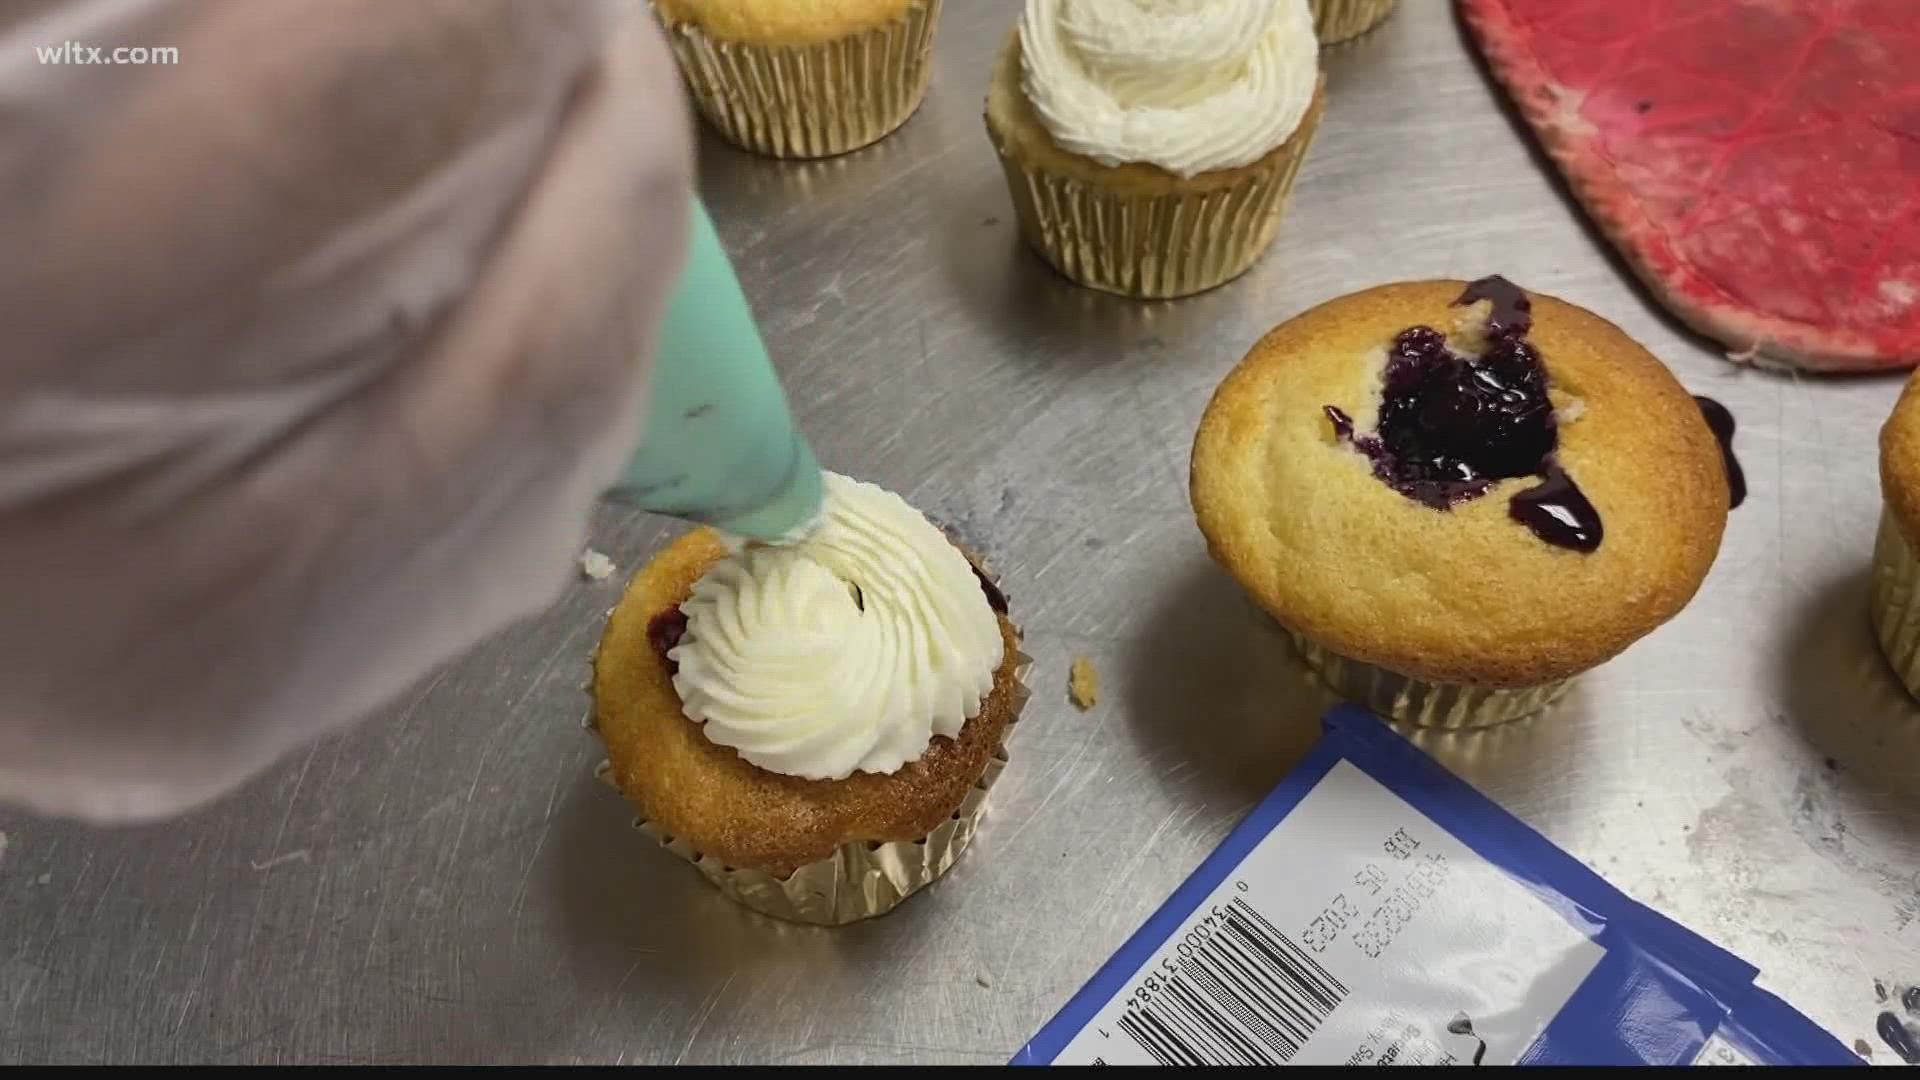 Culinary Arts students are showing off their baking skills and decorating of cupcakes.